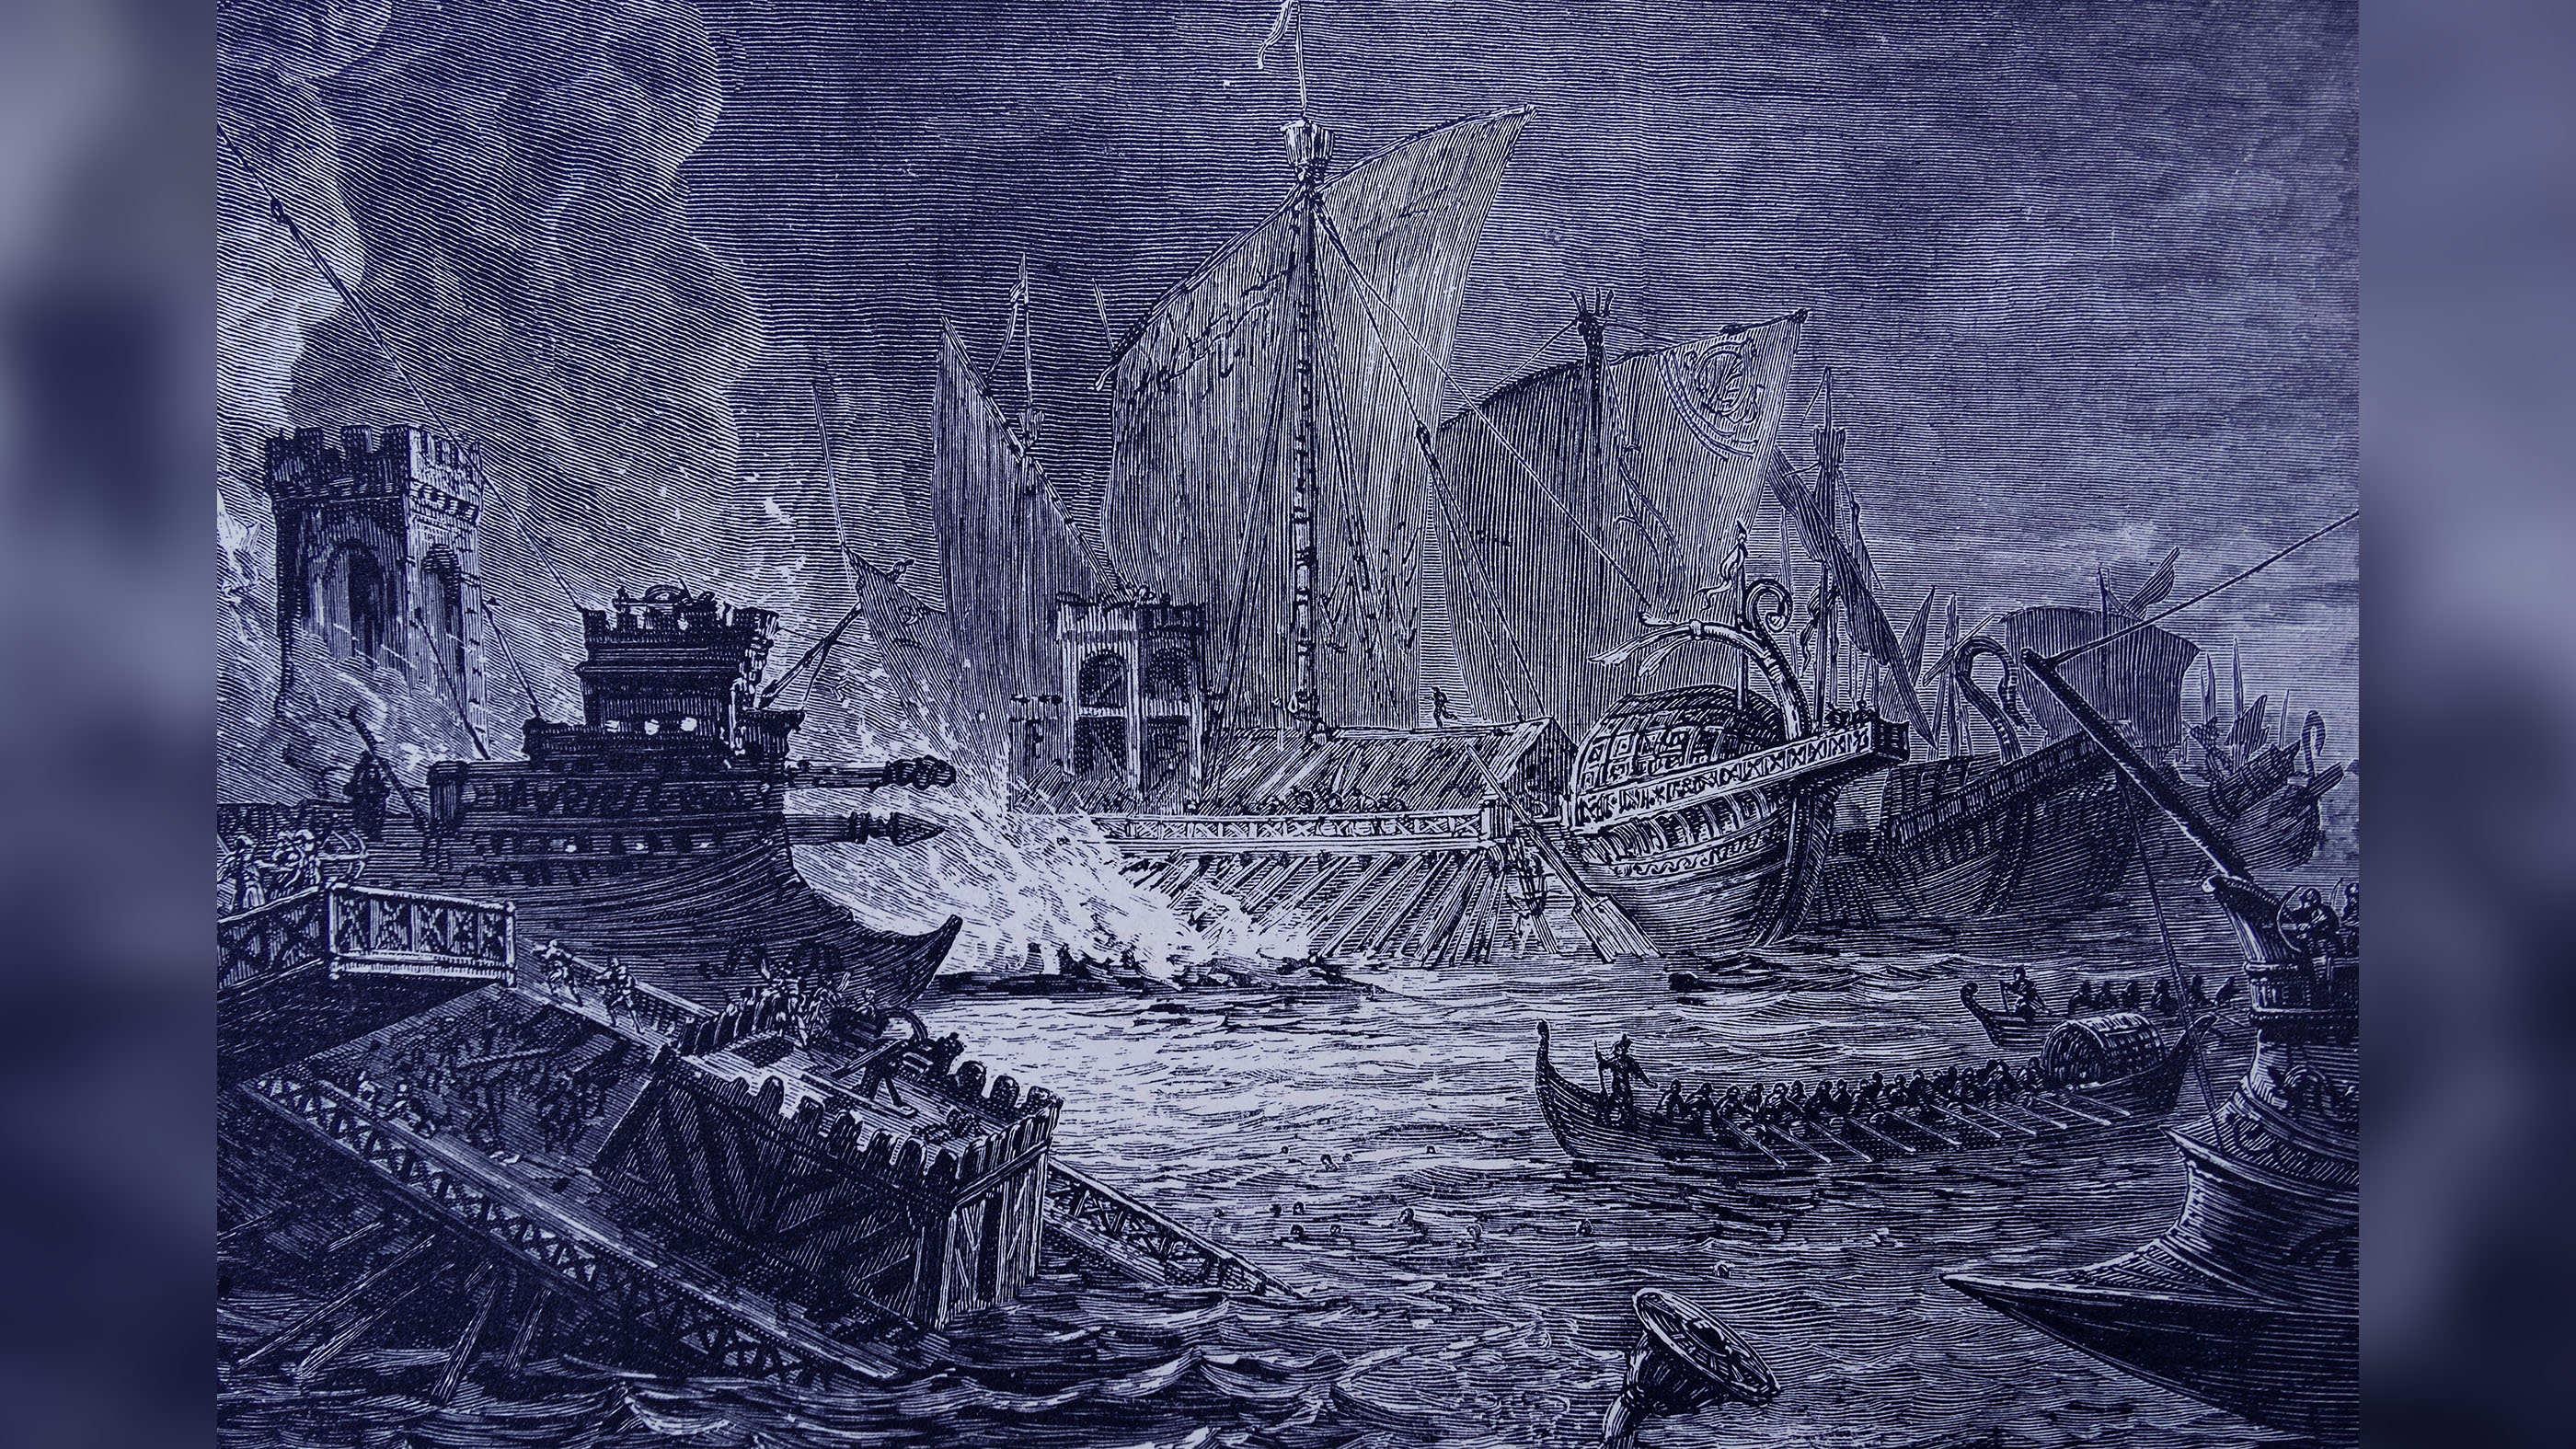 The Battle of Actium, depicted in this engraving, was the decisive confrontation of the Final War of the Roman Republic, a naval engagement between Octavian and the combined forces of Mark Antony and Cleopatra on Sept. 2, 31 B.C.